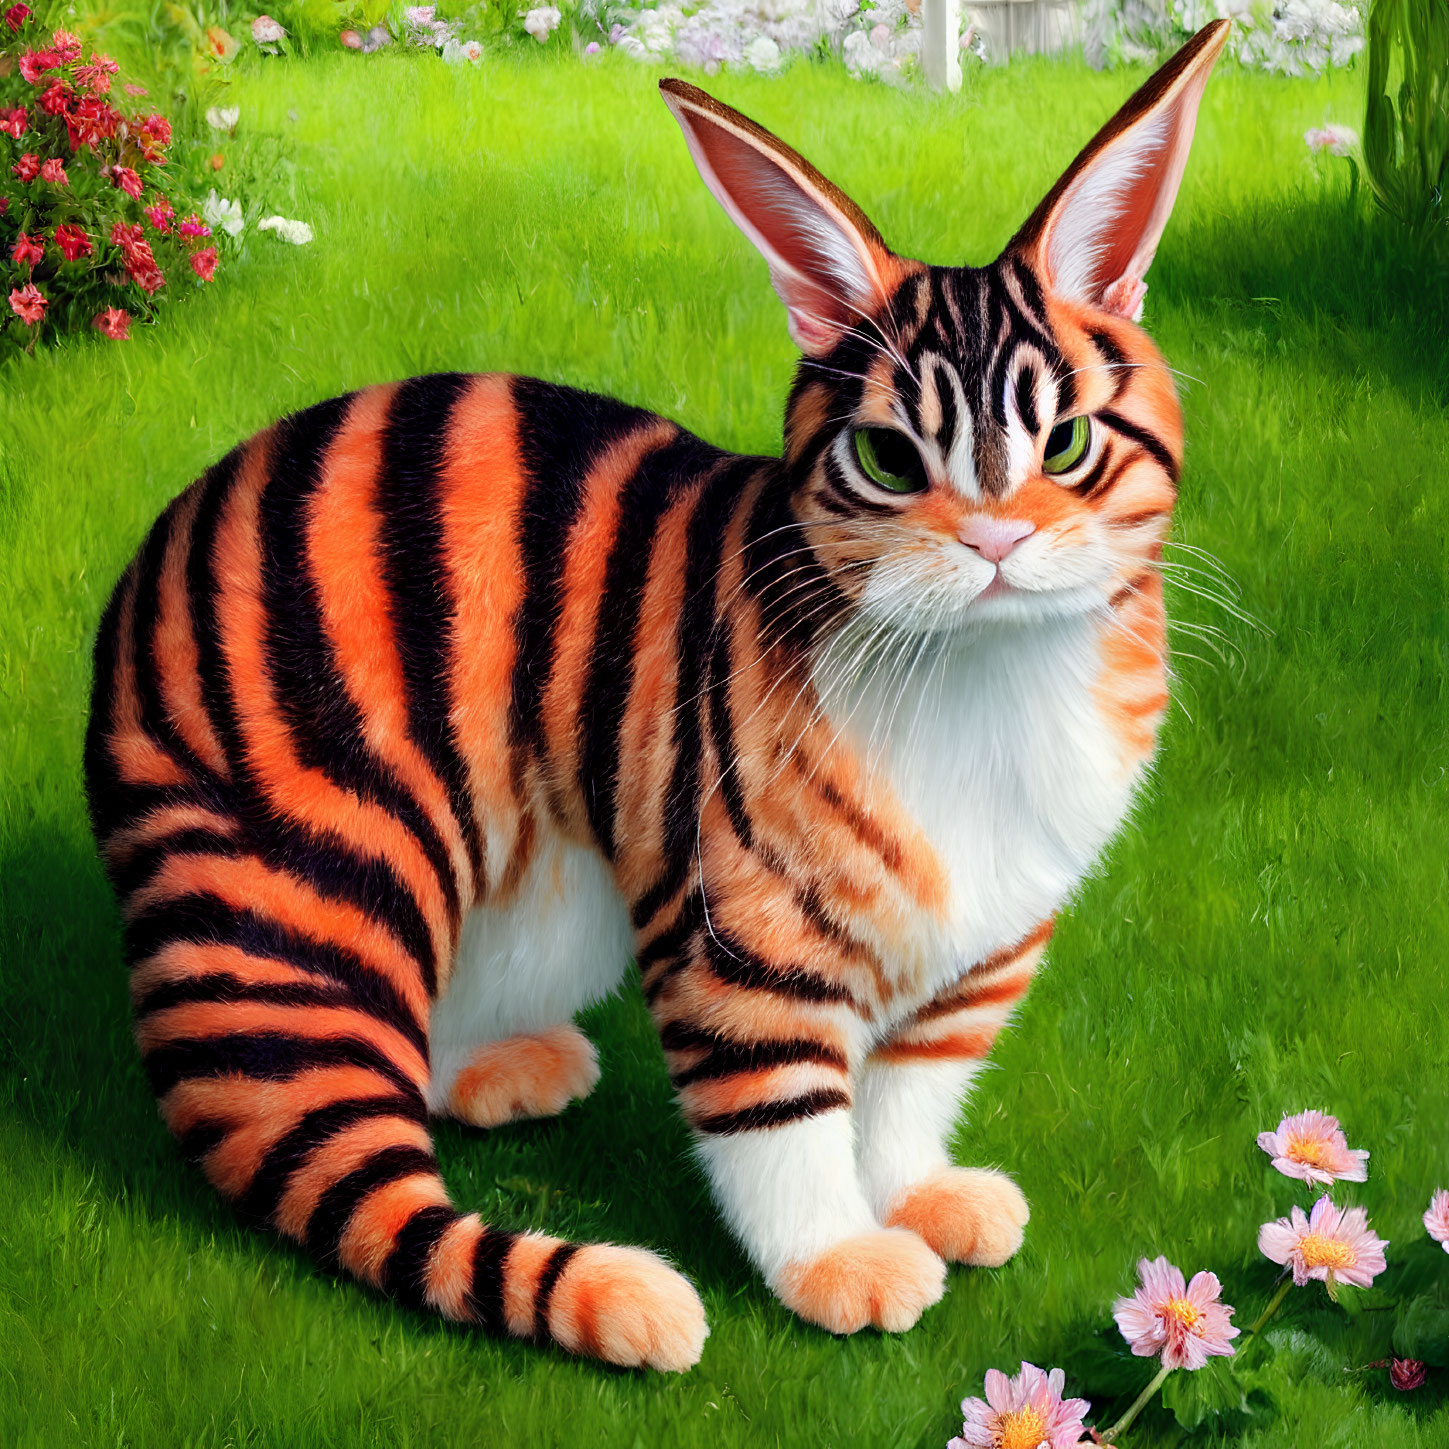 Digitally Altered Image: Cat with Tiger-Like Orange and Black Stripes in Colorful Garden